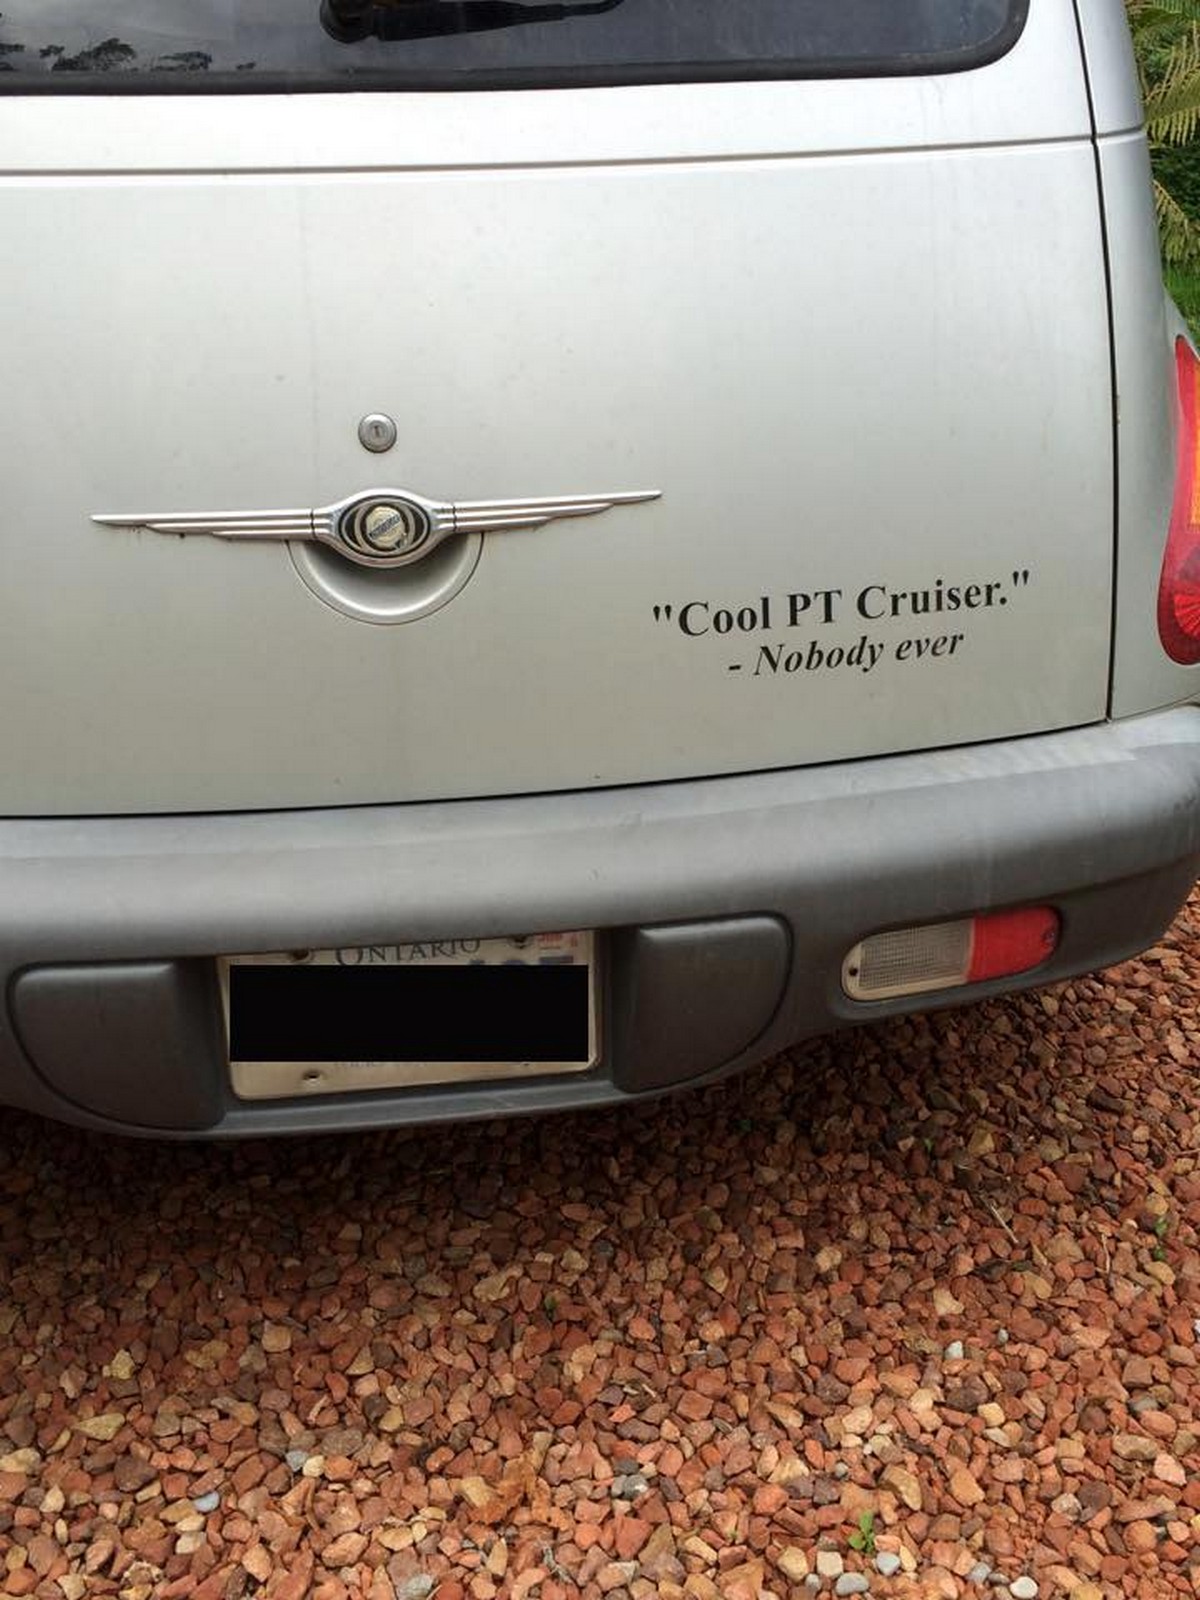 27 Funny Bumper Stickers - Three words you will never hear.